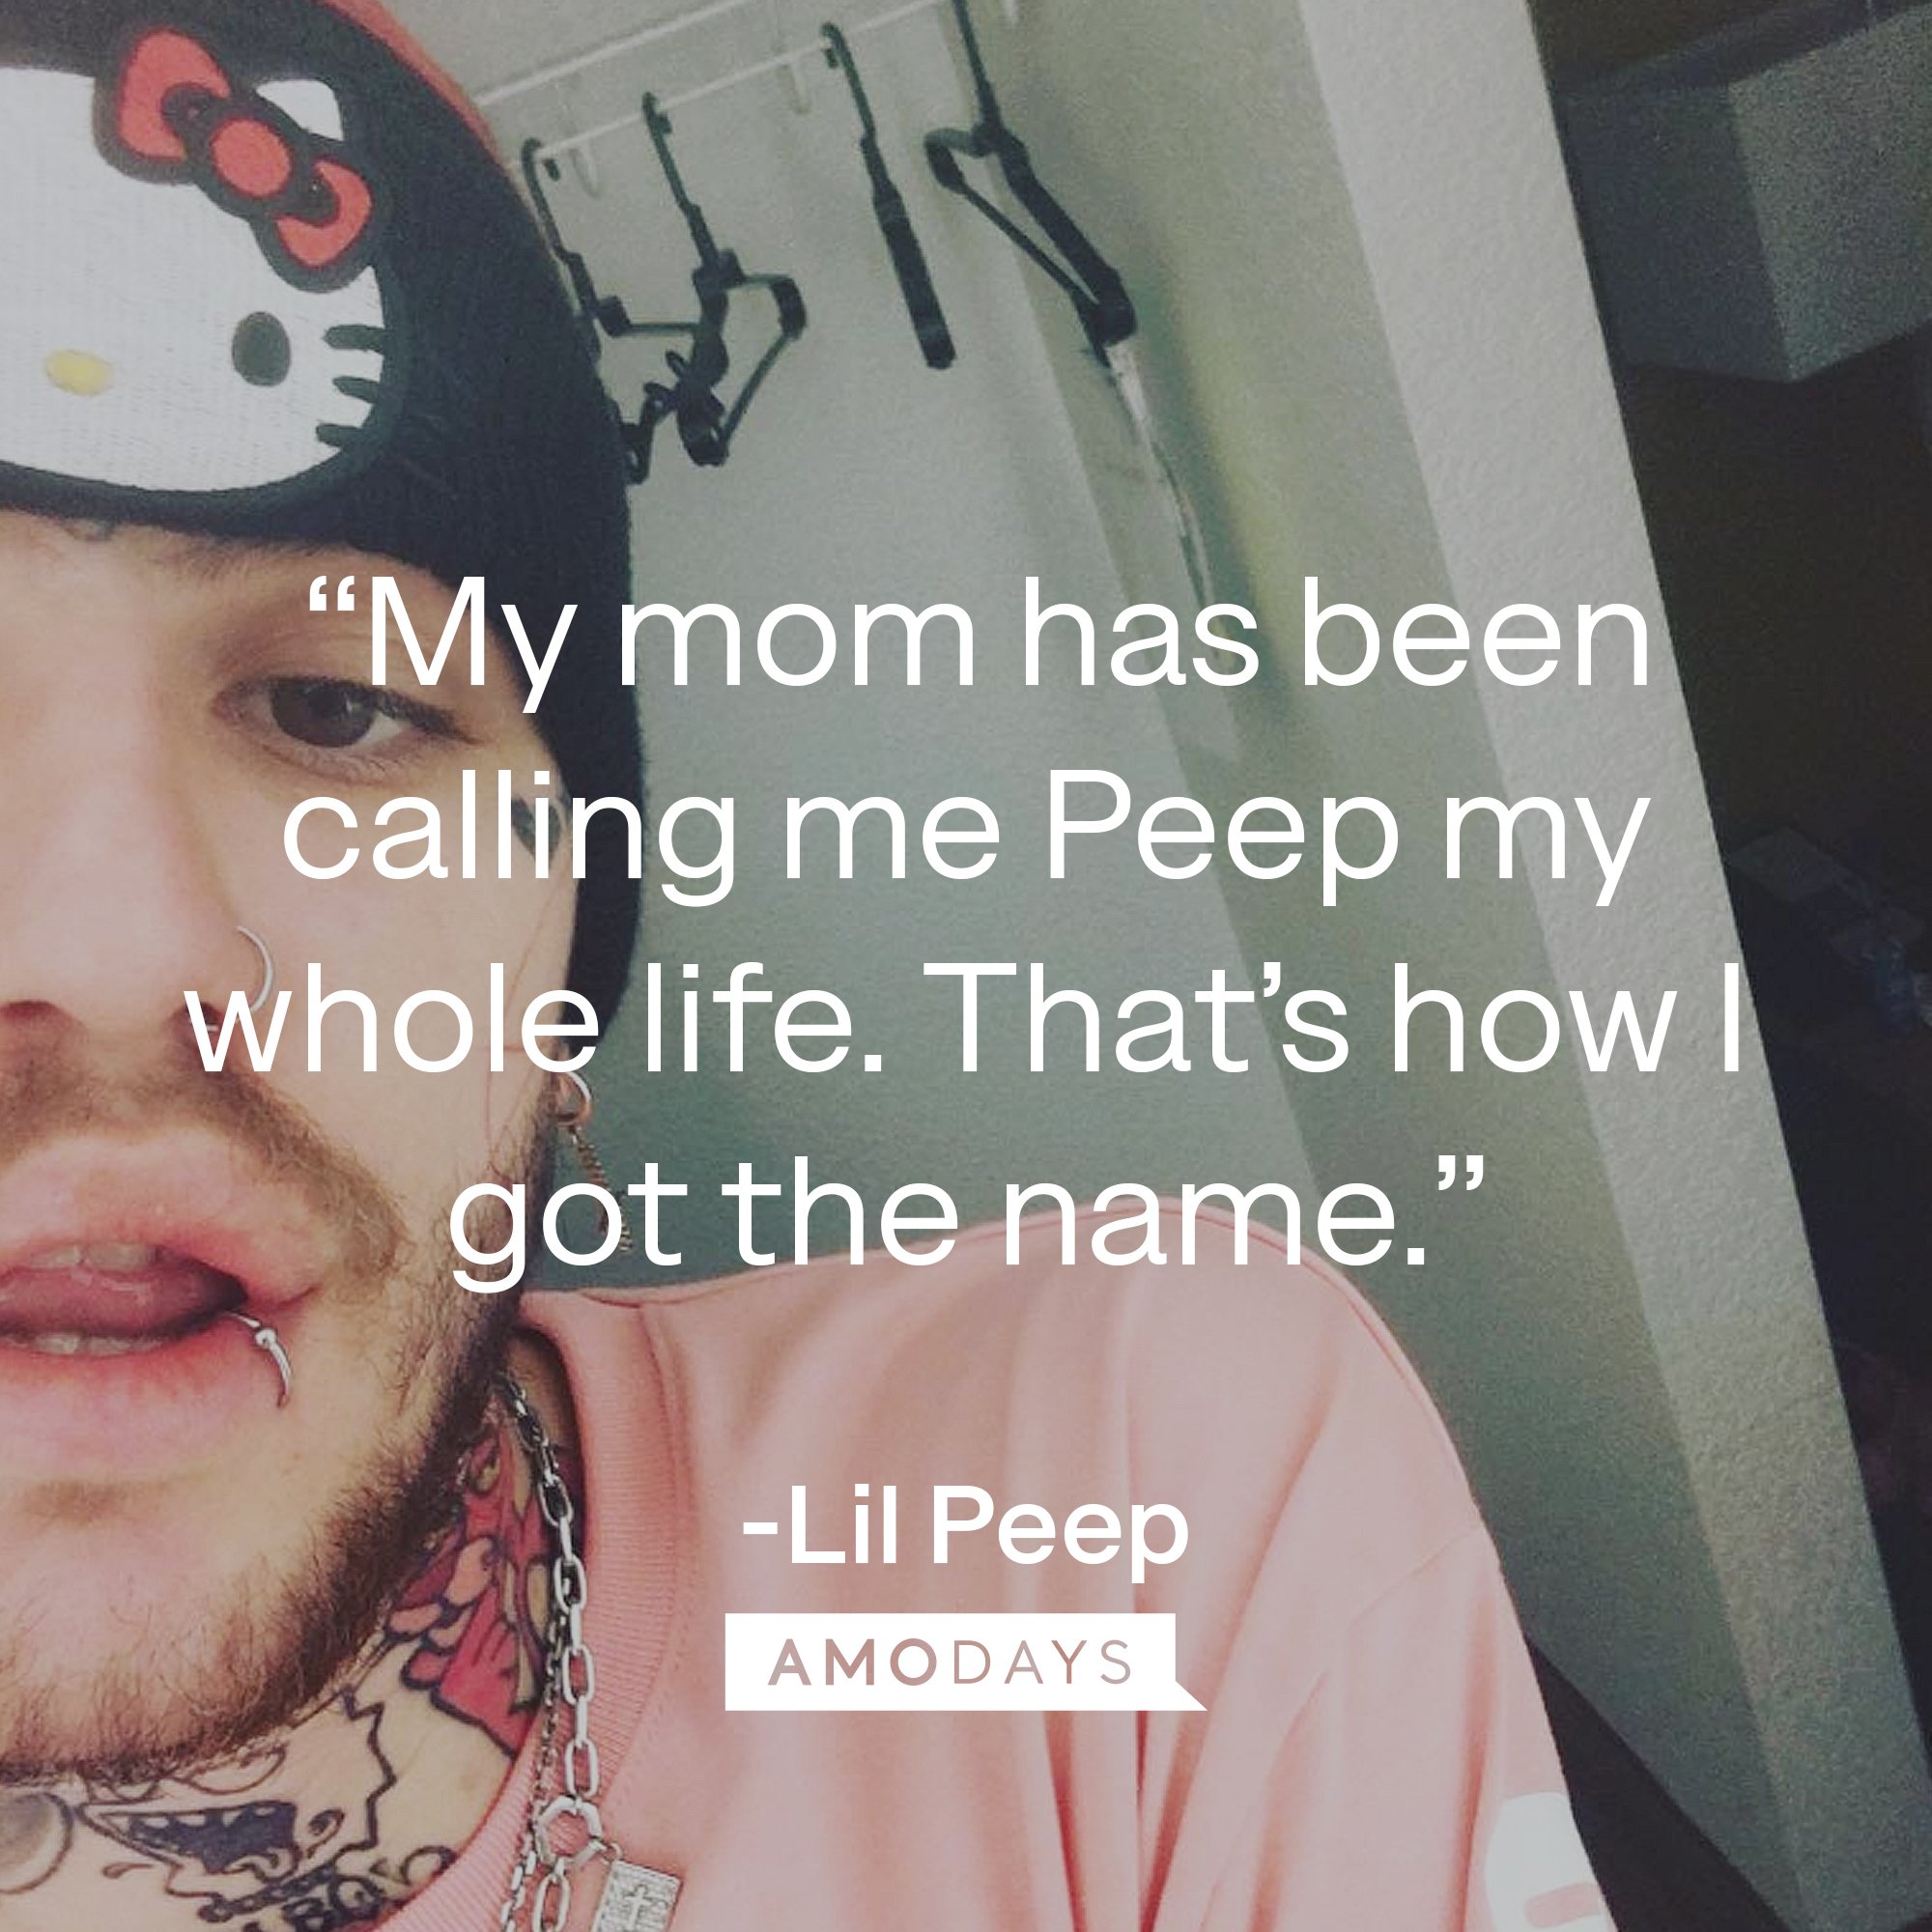 Lil Peep's quote: “My mom has been calling me Peep my whole life. That’s how I got the name.” | Image: AmoDays